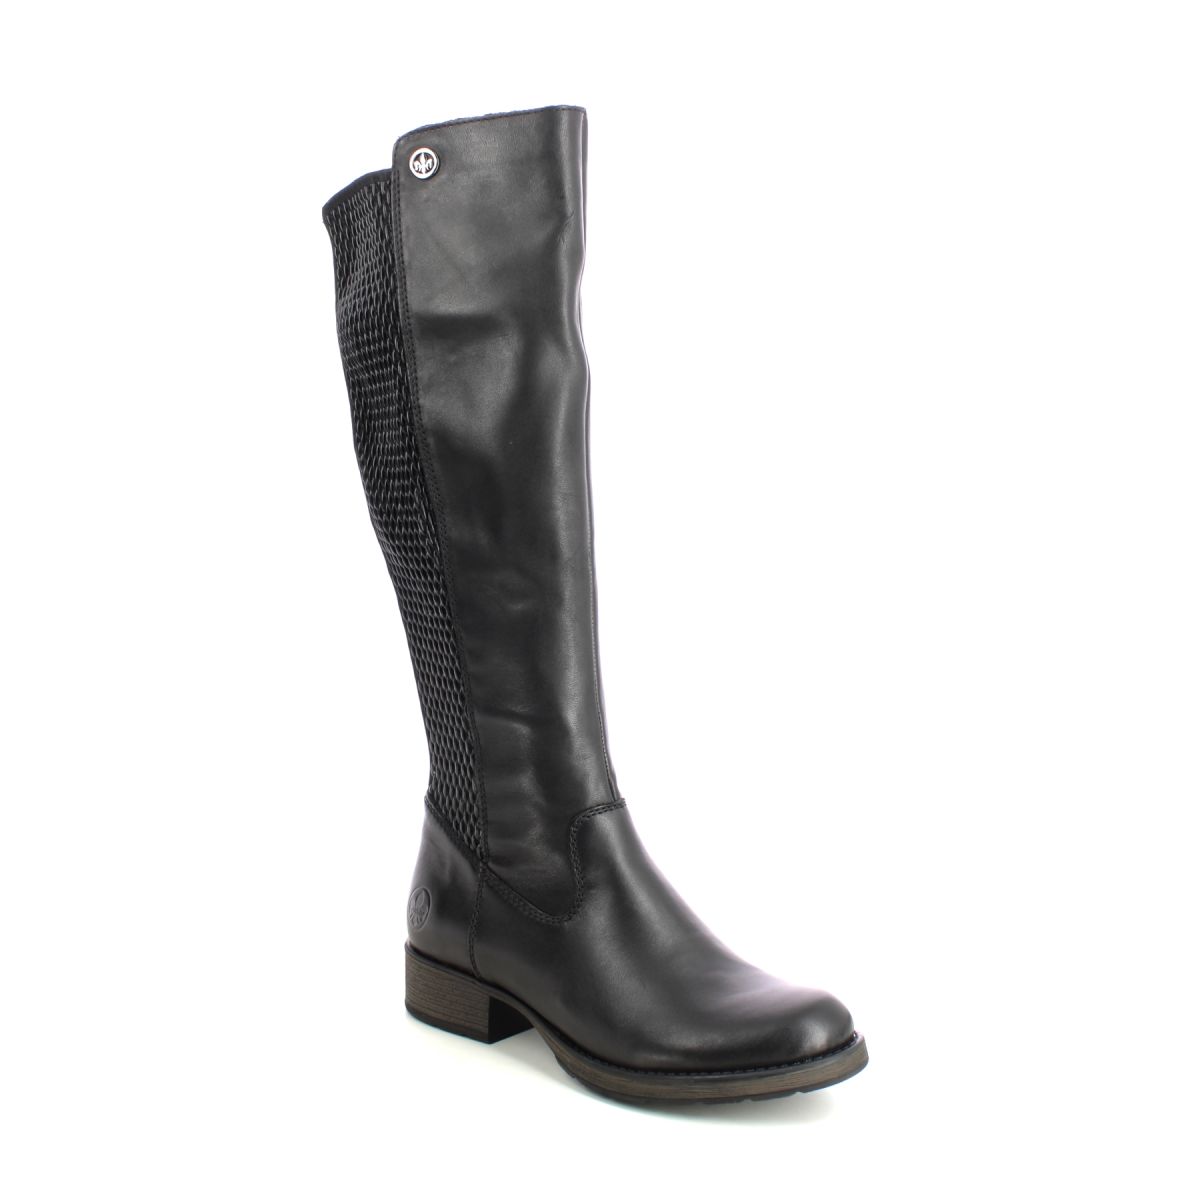 Rieker Indafit Stretch Black Leather Womens Knee-High Boots Z9591-00 In Size 38 In Plain Black Leather